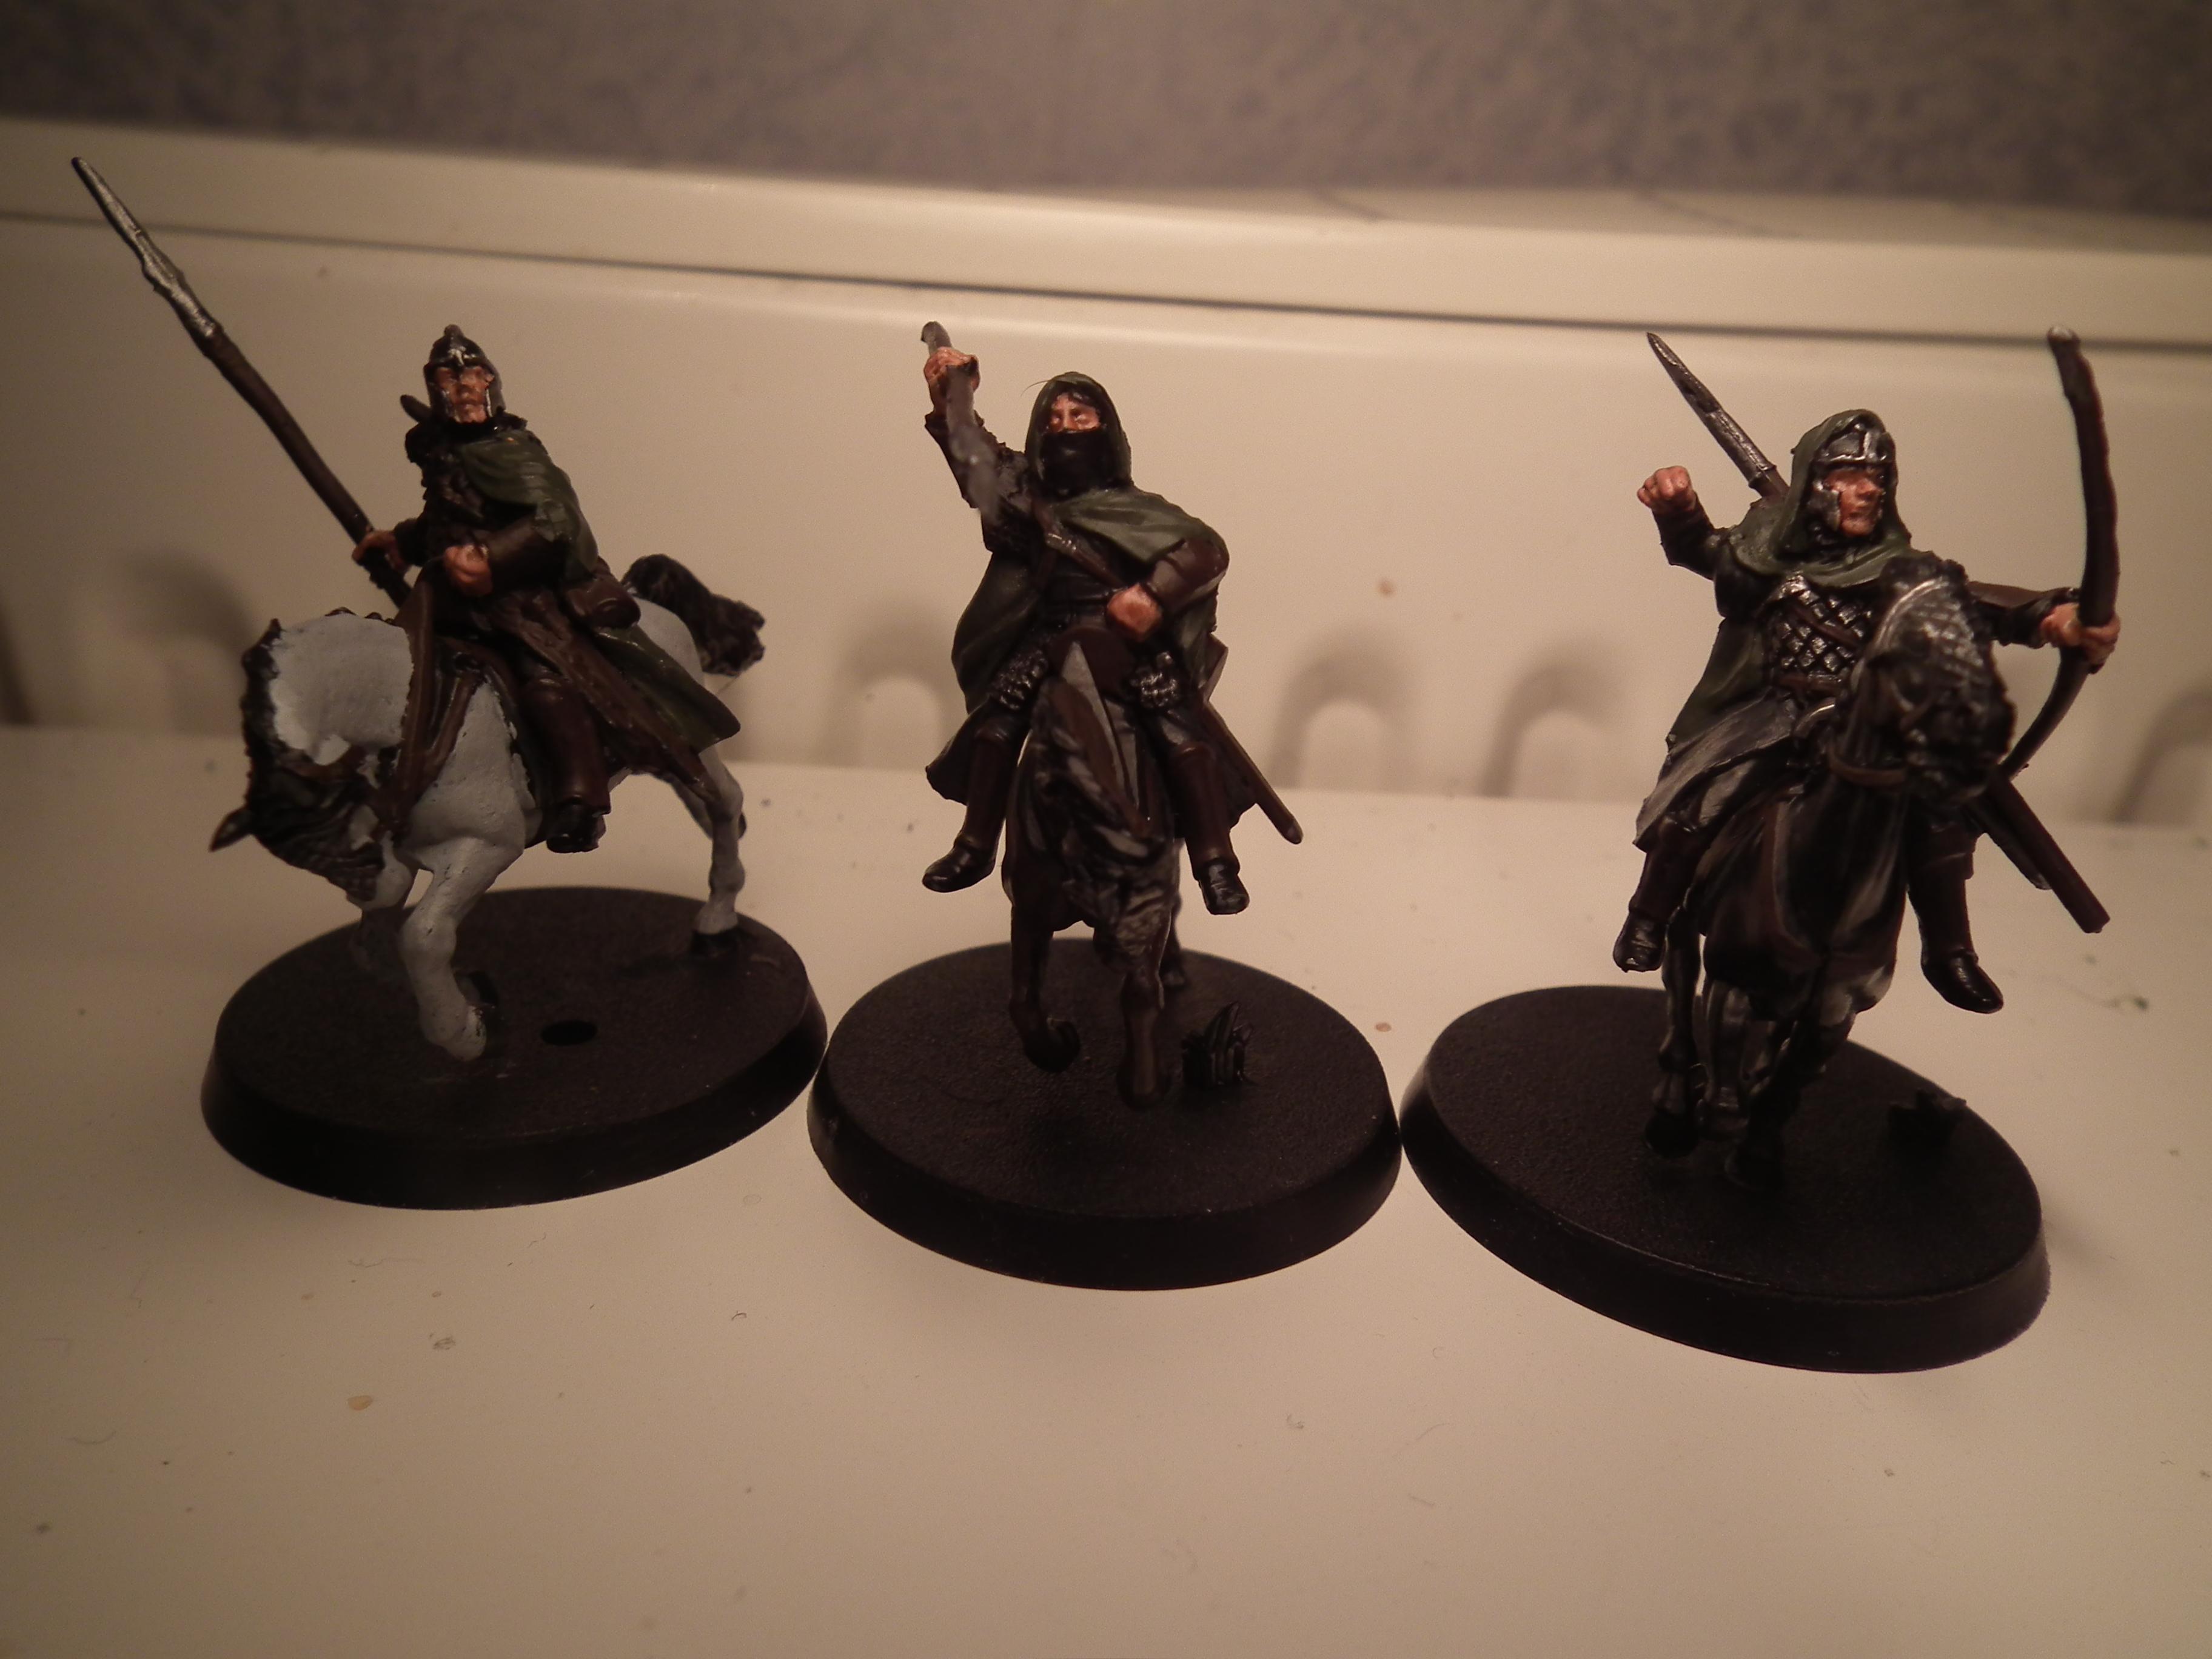 Cavalry, Lord Of The Rings, North, Rangers, Rohan